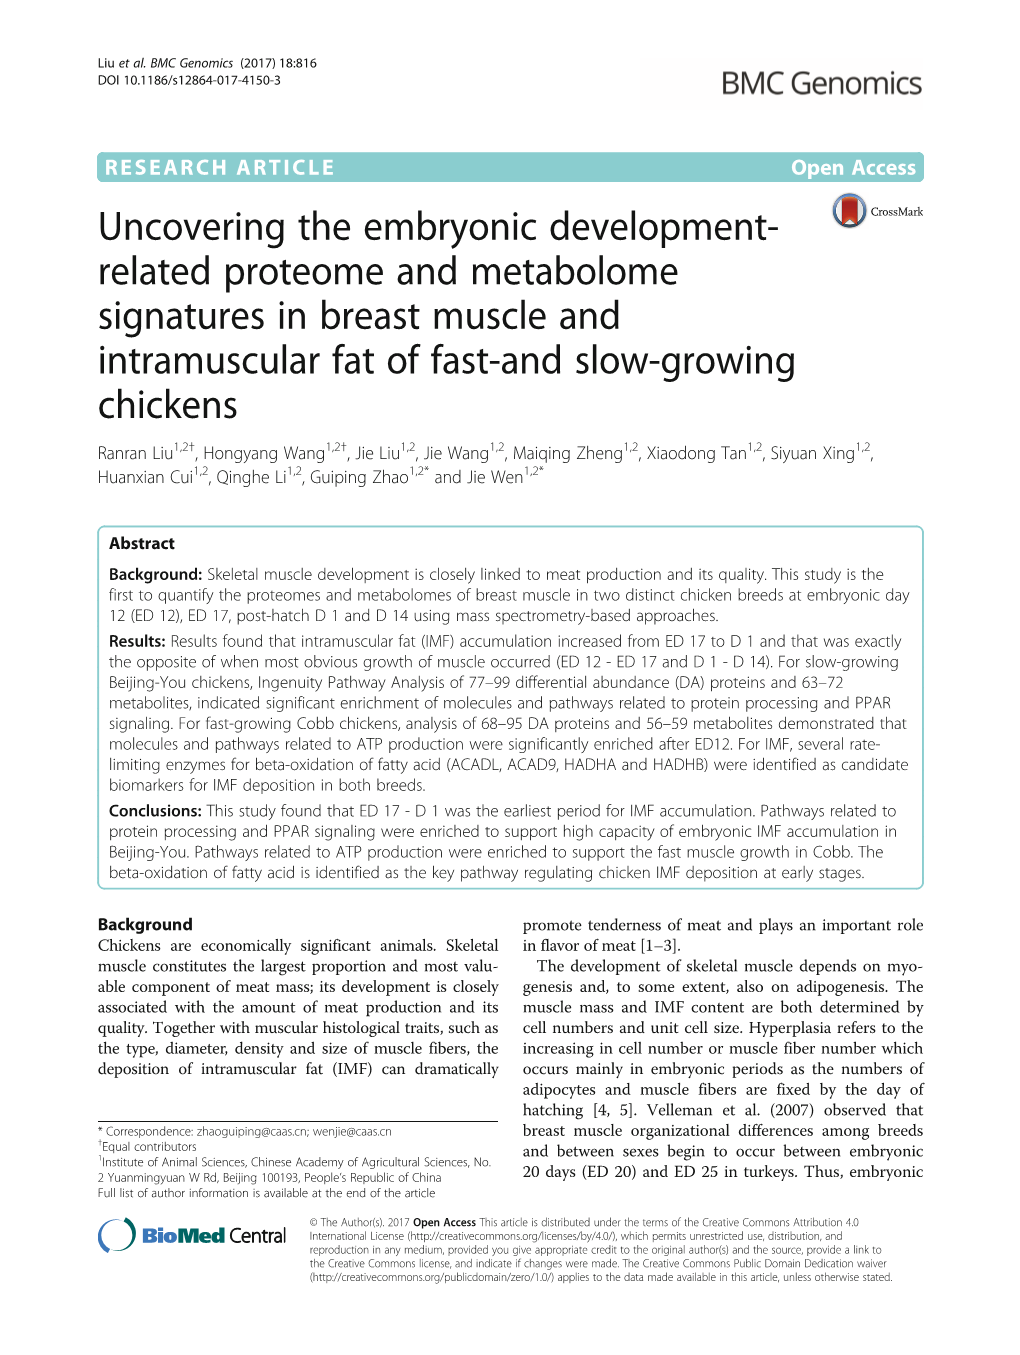 Uncovering the Embryonic Development-Related Proteome And